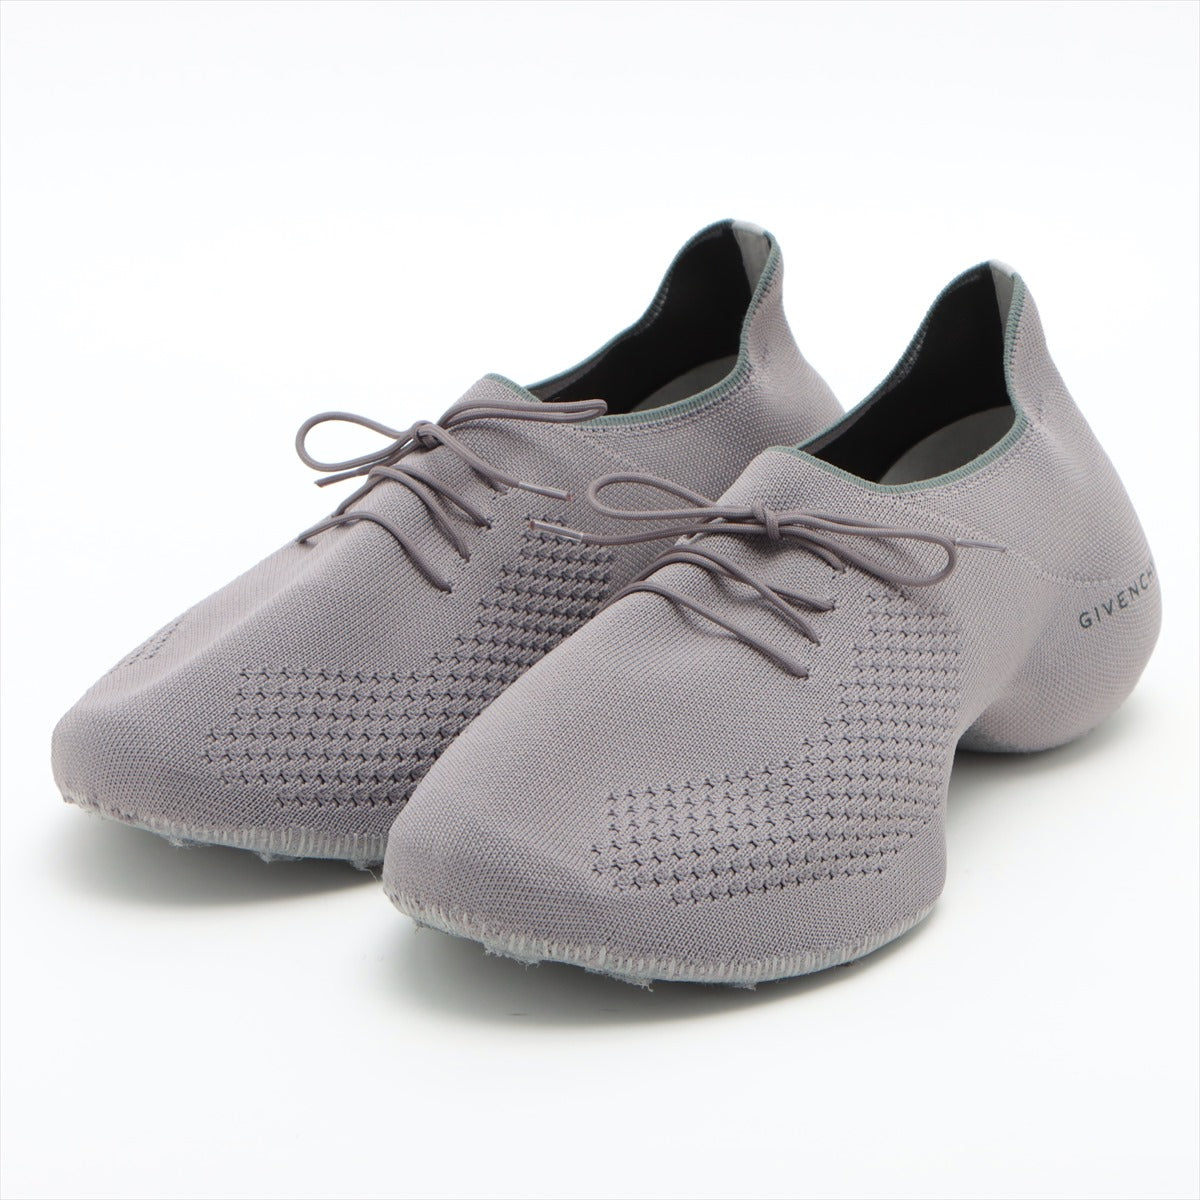 Givenchy Knit Sneakers 42 Men's Grey FR0232 TK-360